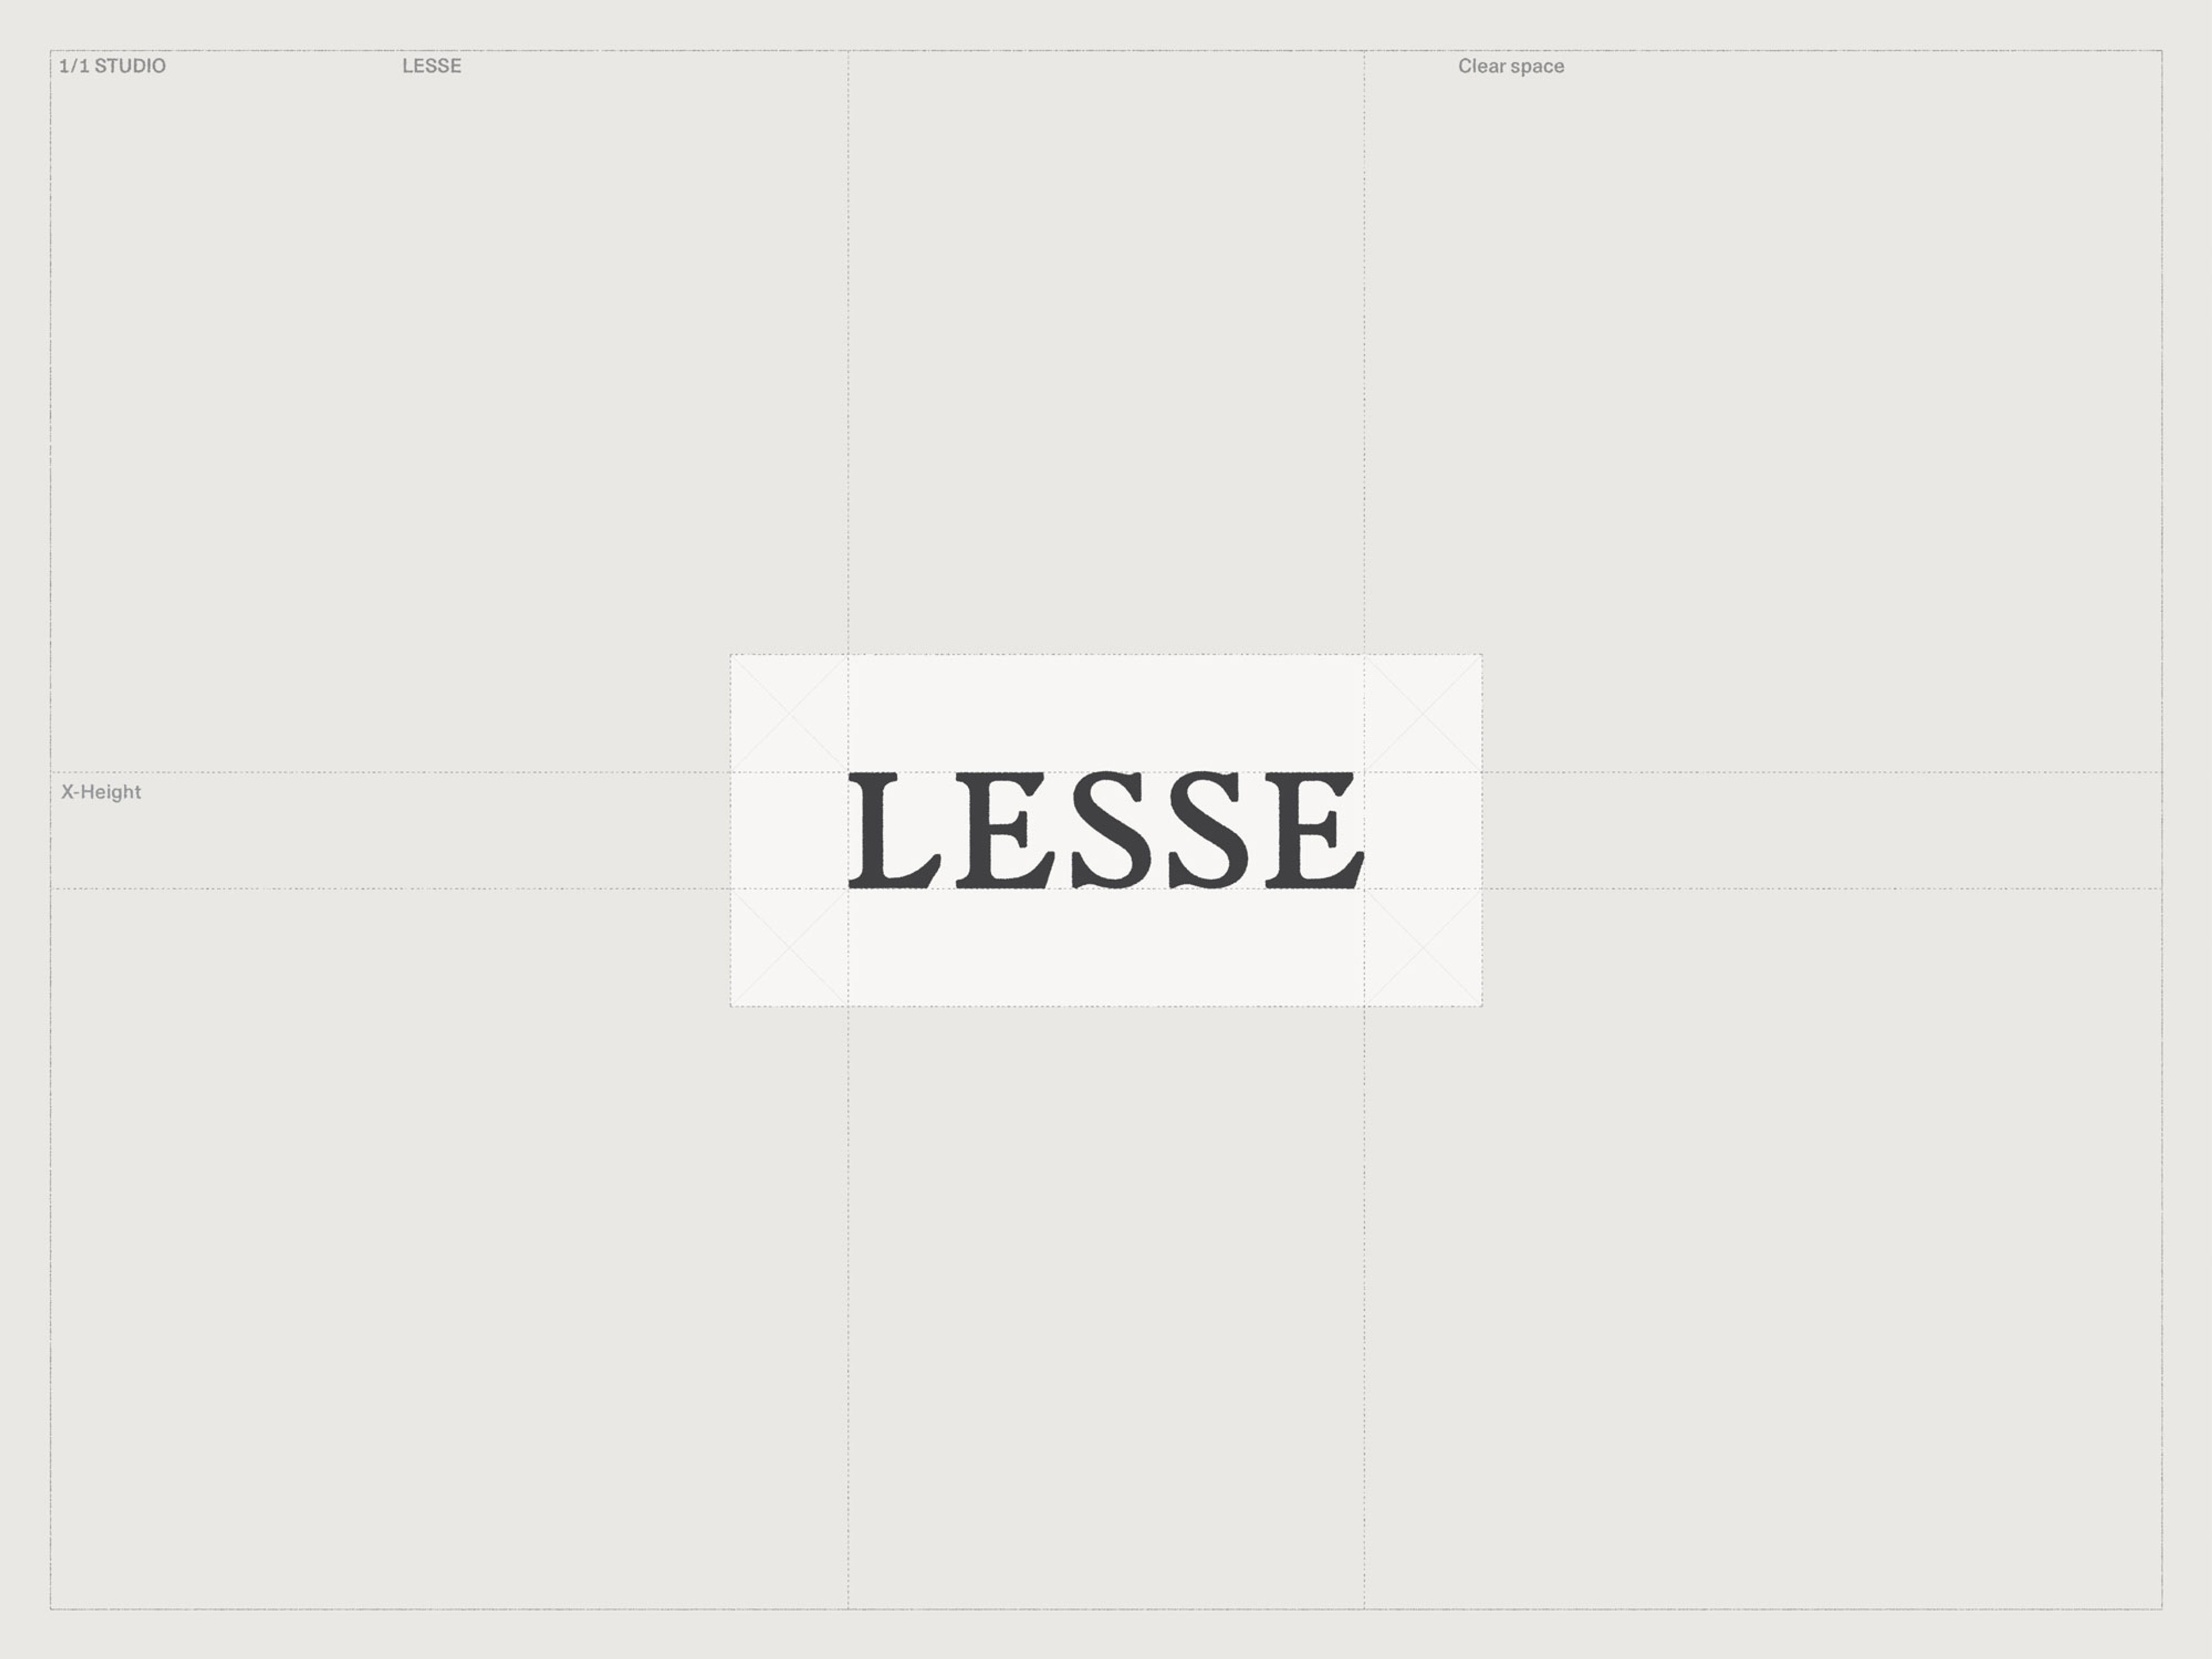 Logotype Clearspace